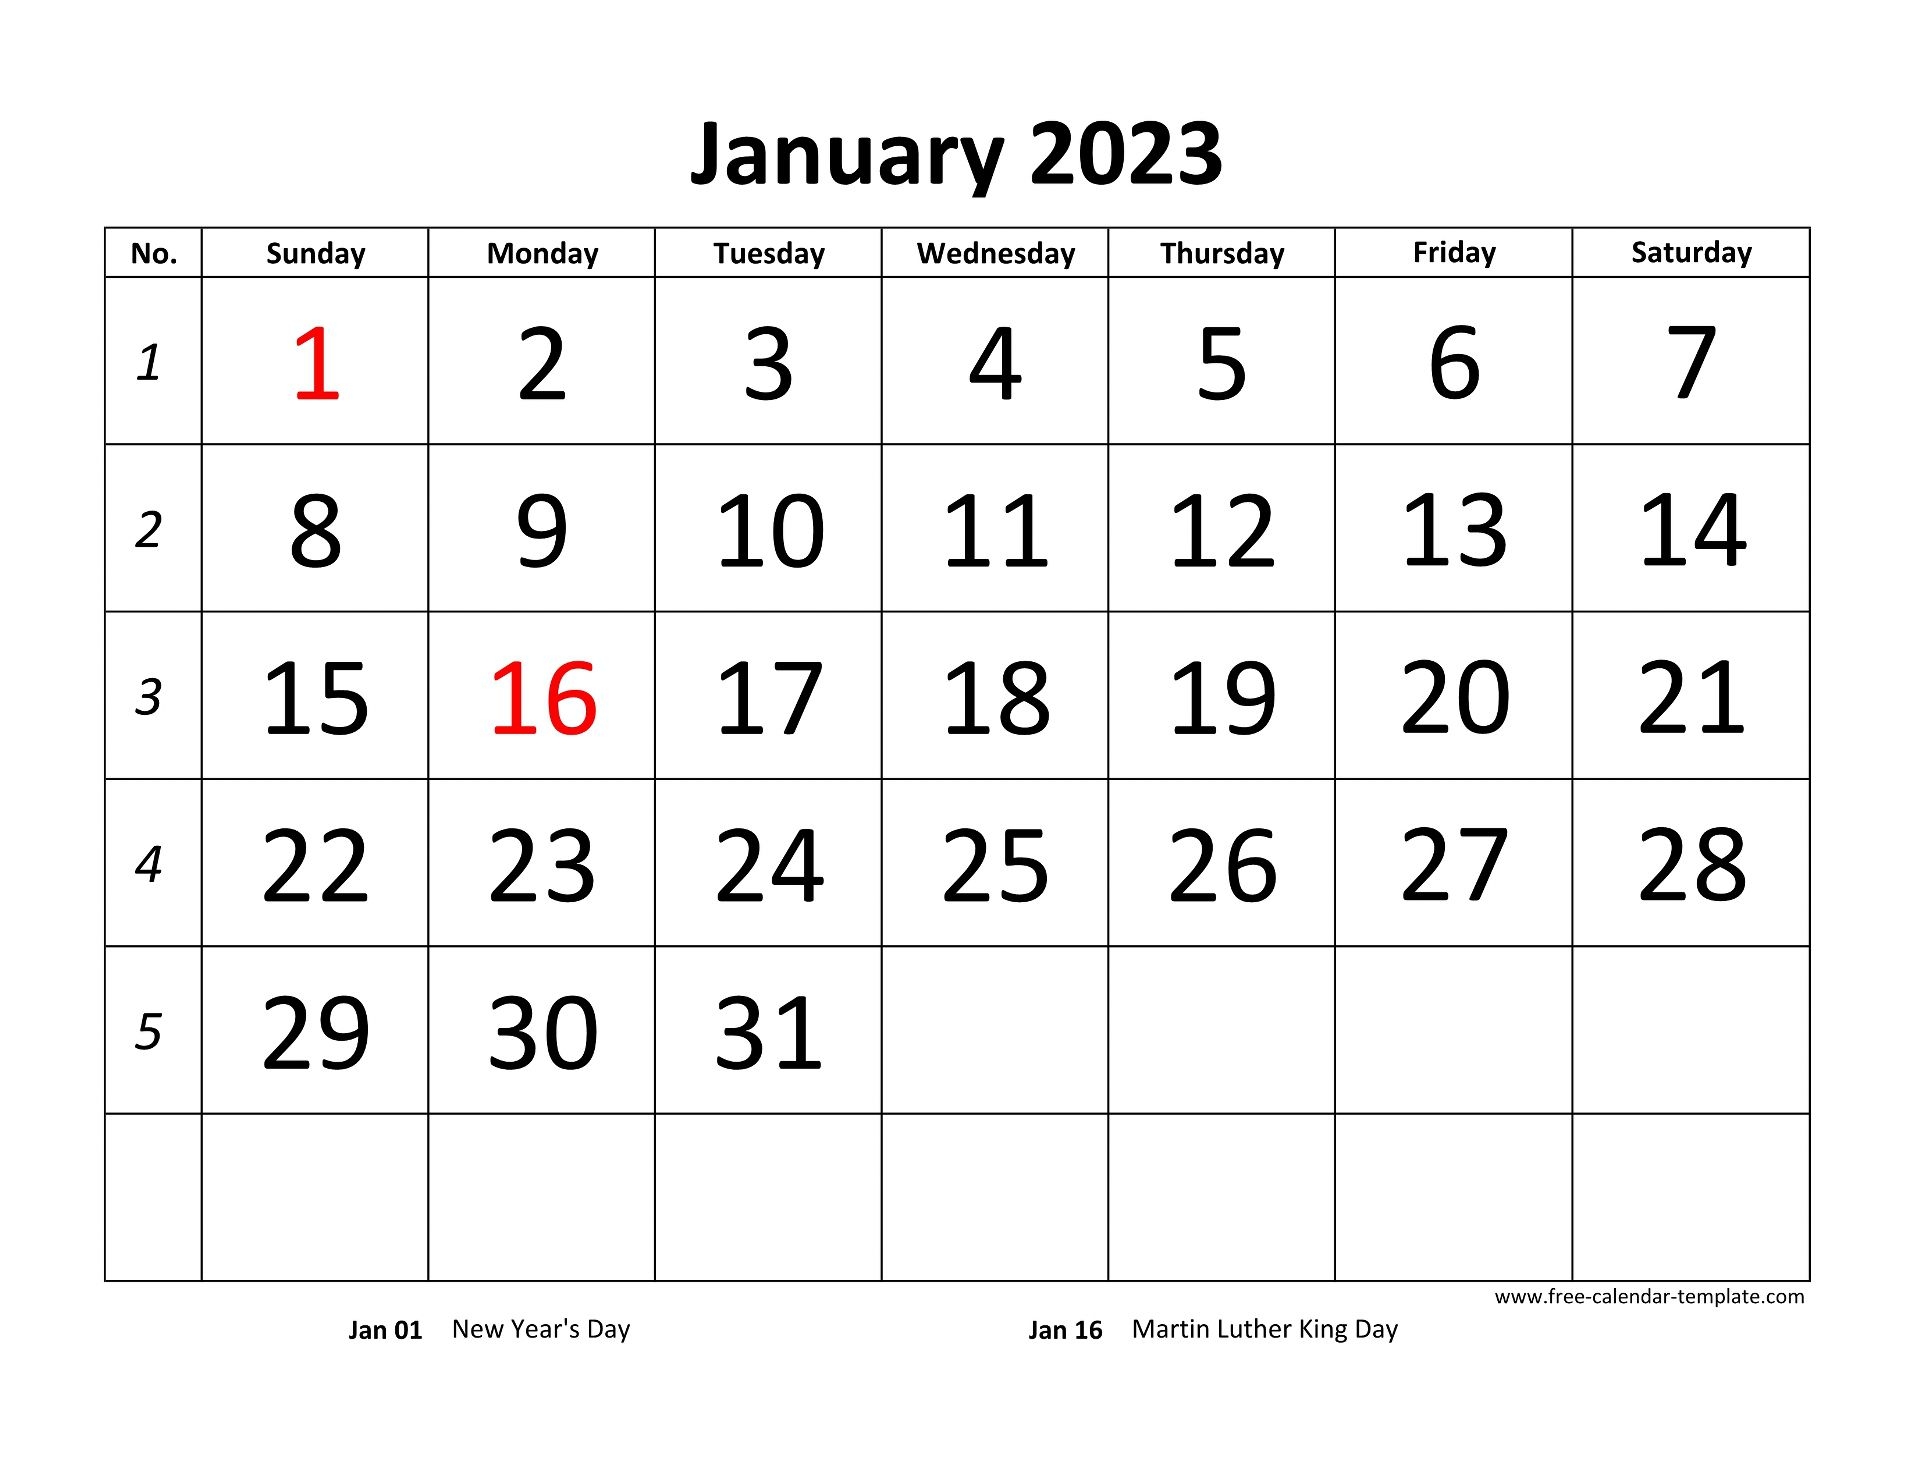 2023 Monthly Calendar With Holidays Printable